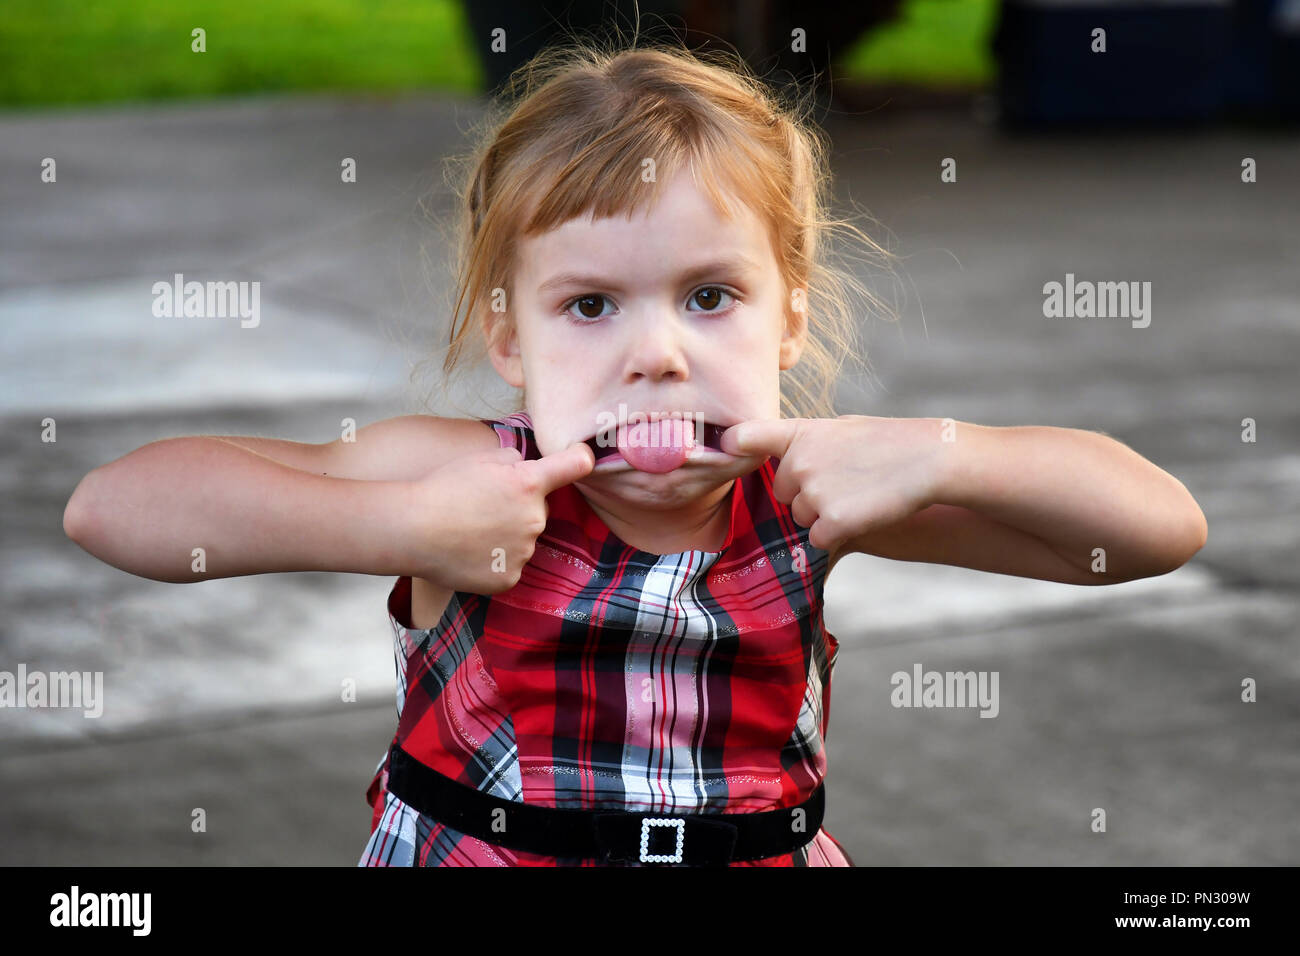 4-year-old girl making a silly face Stock Photo